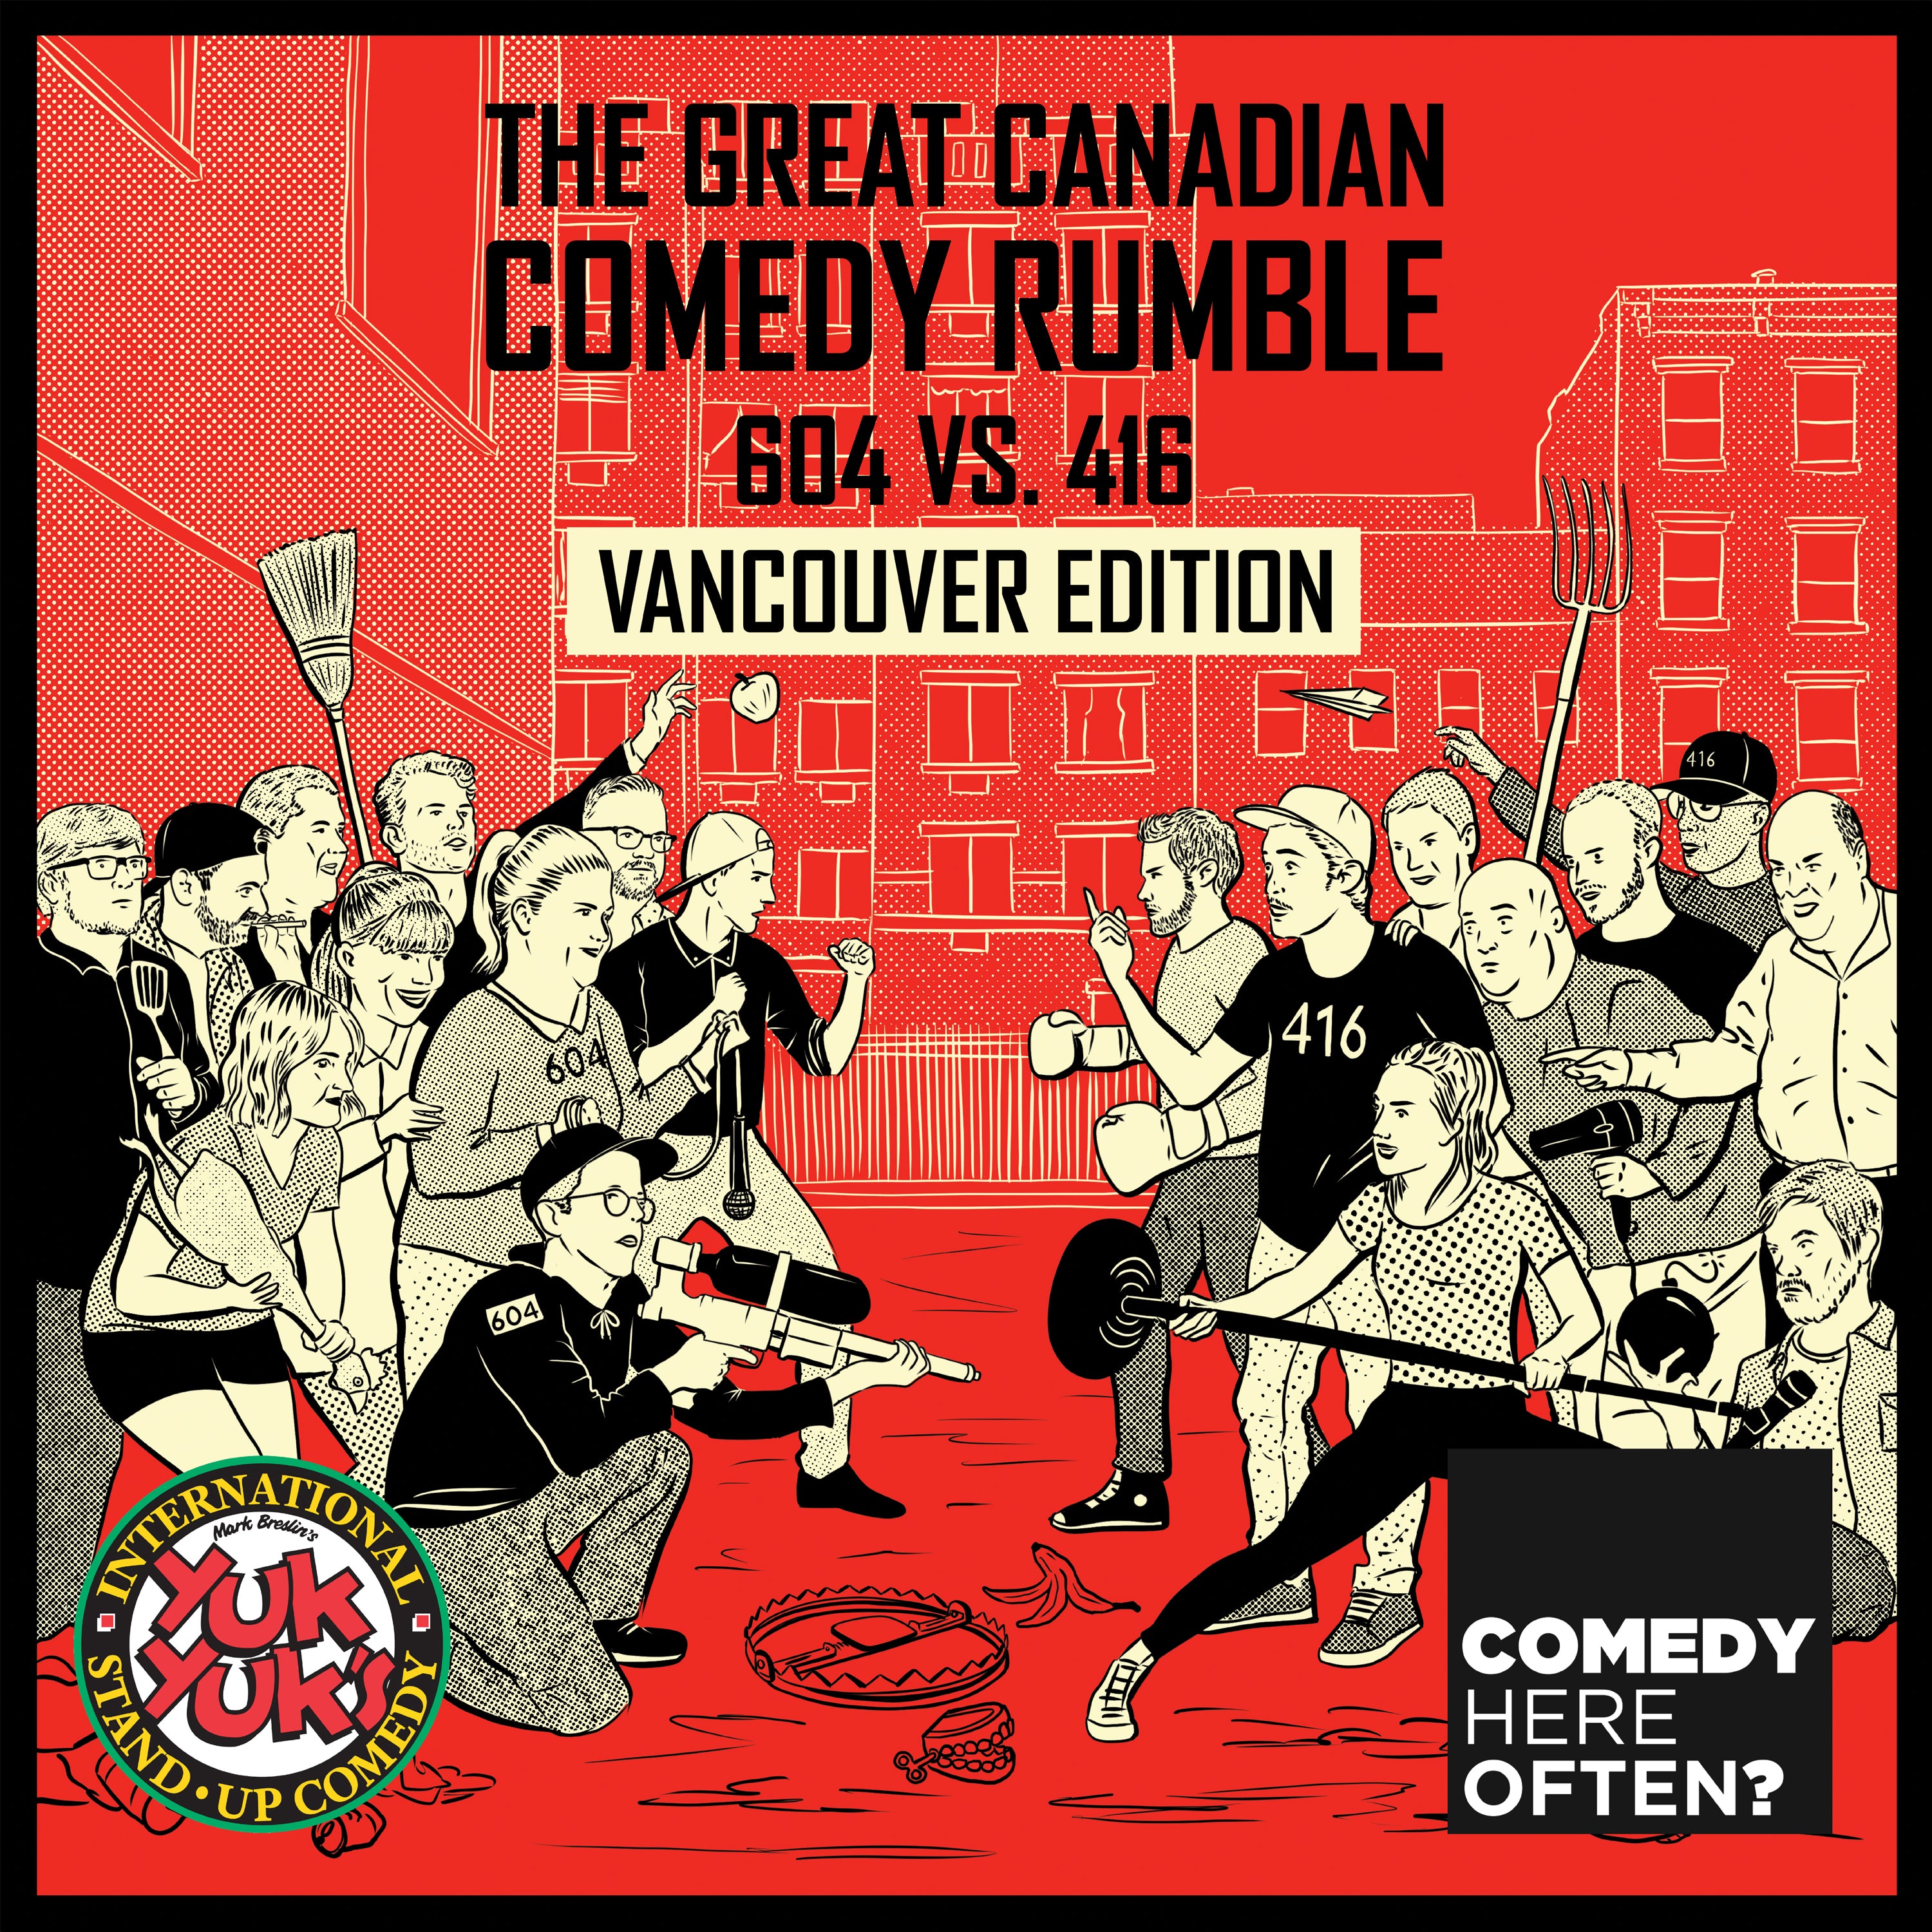 CHO The Great Canadian Comedy Rumble: 604 vs. 416 (Vancouver Edition)